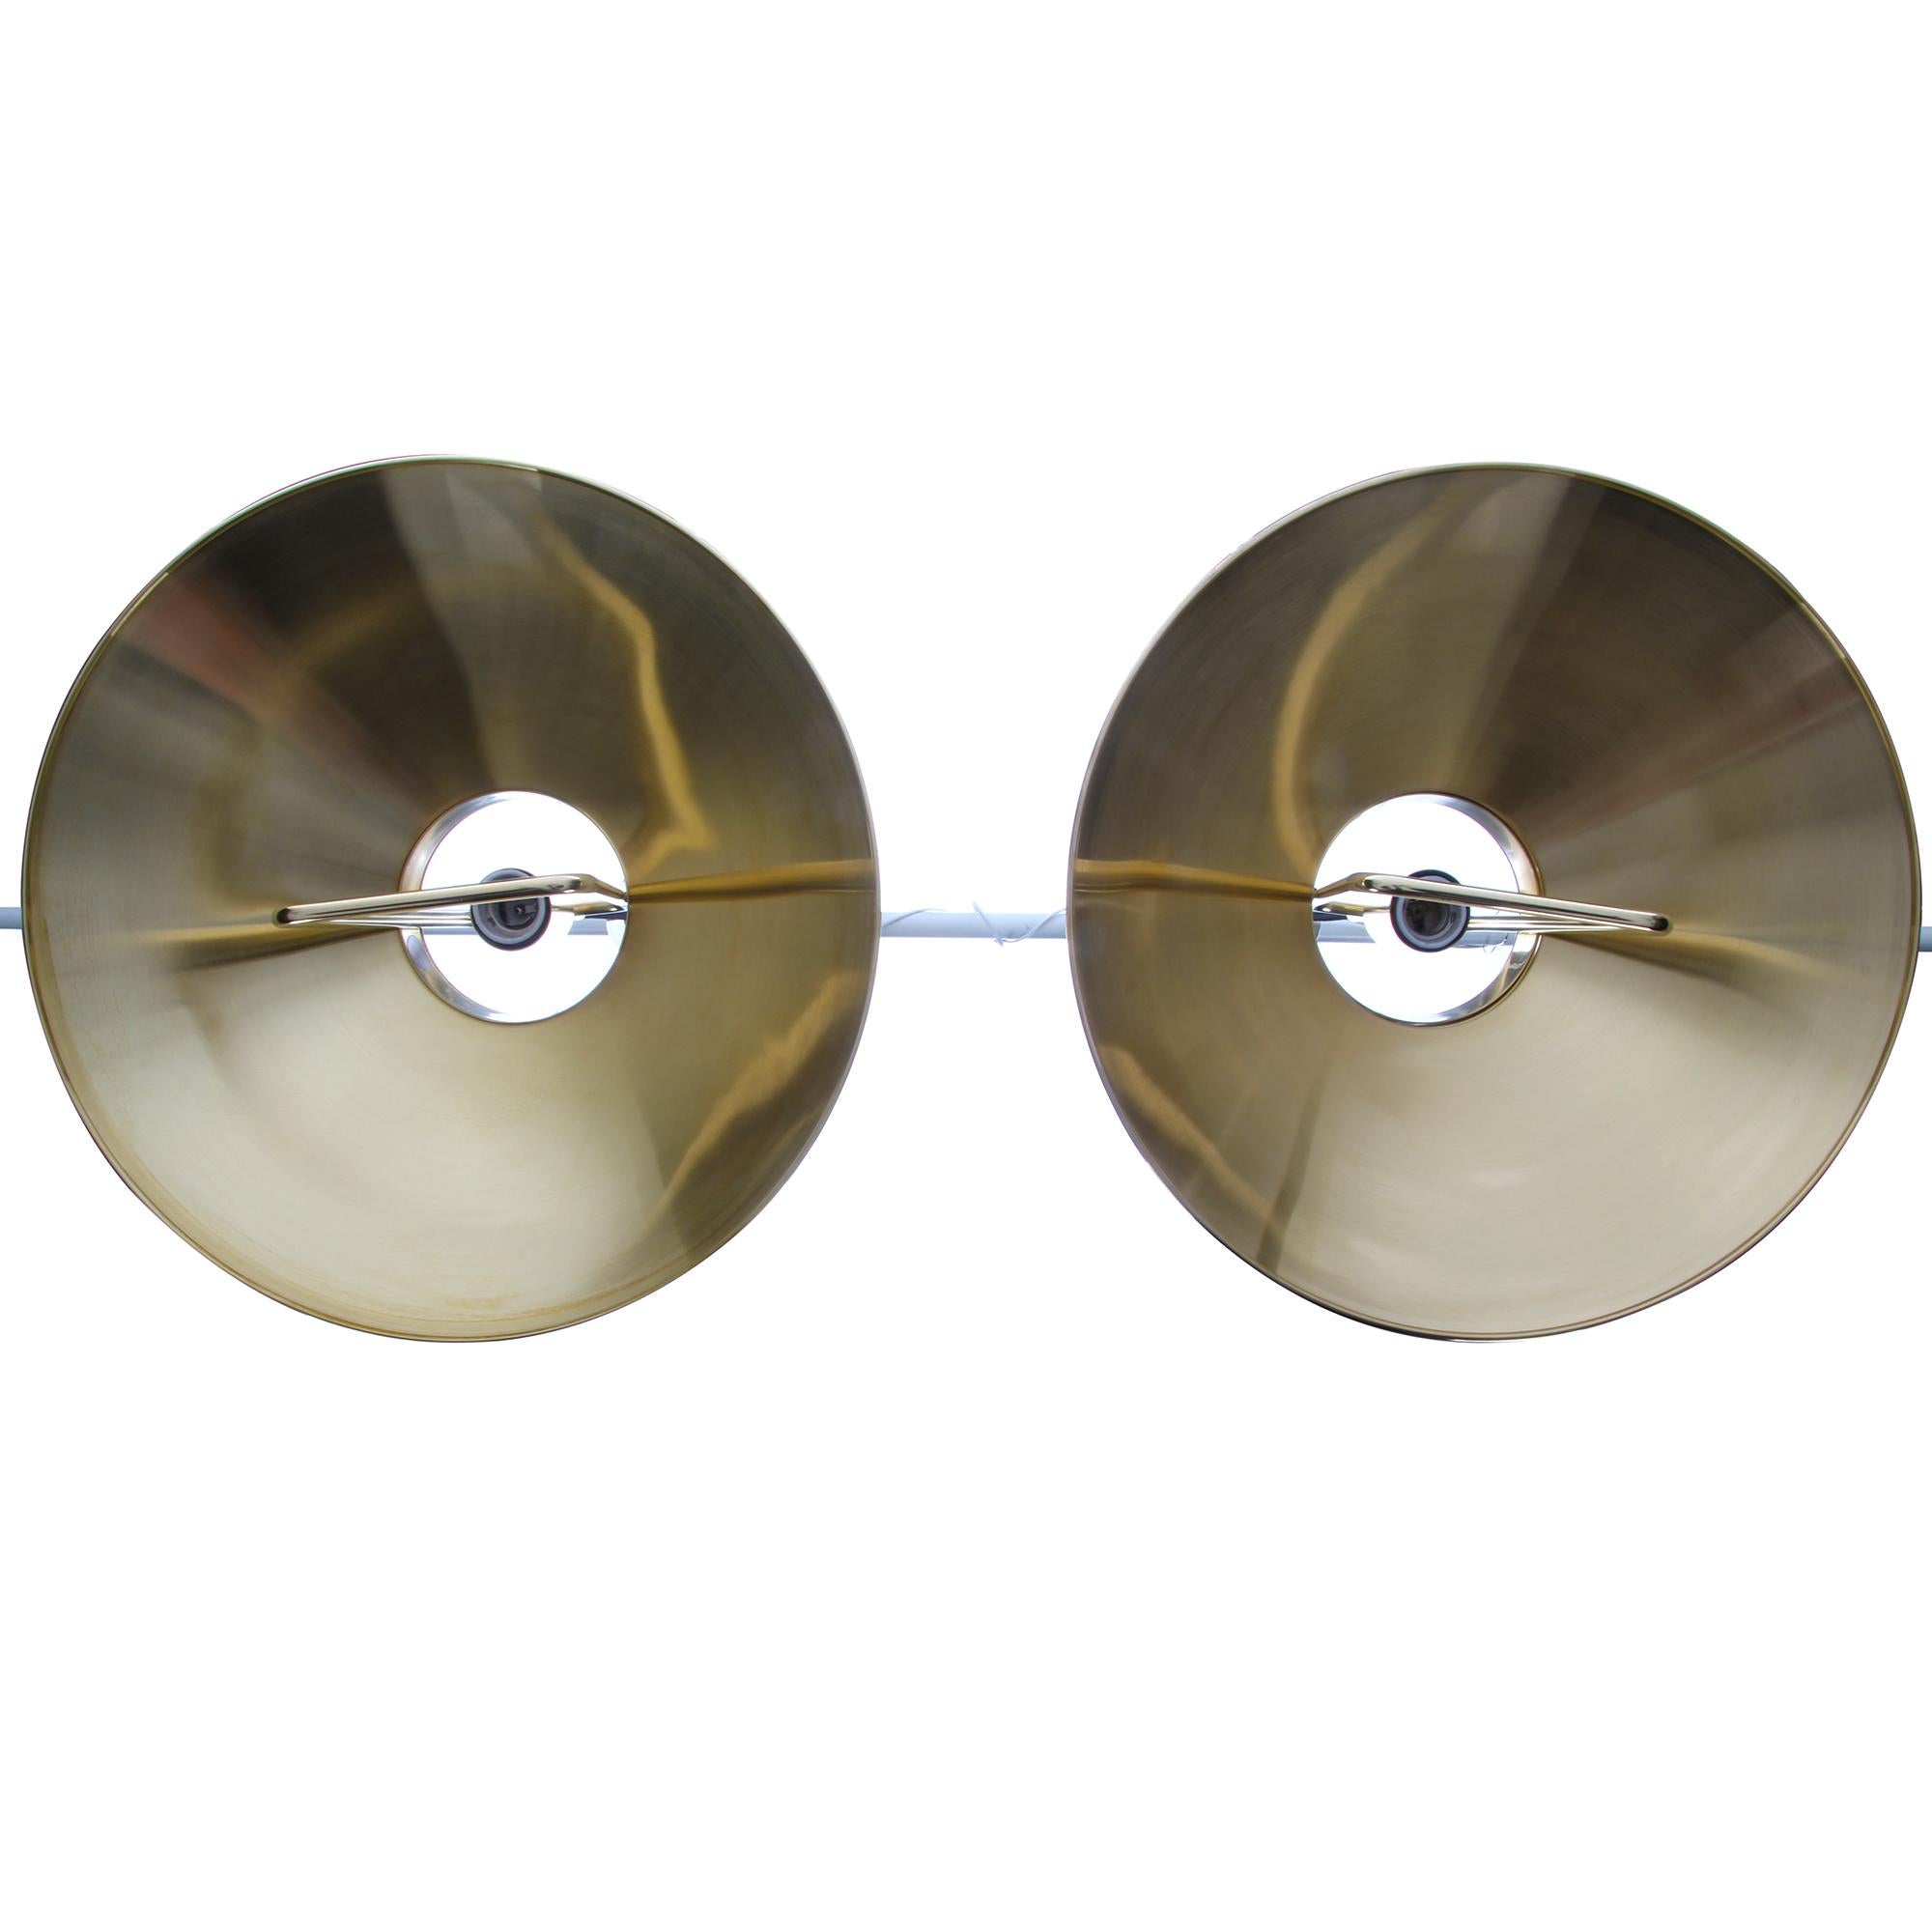 P295 Pendant Pair by Fritz Schlegel in 1938 for Lyfa with Brass Suspensions 1